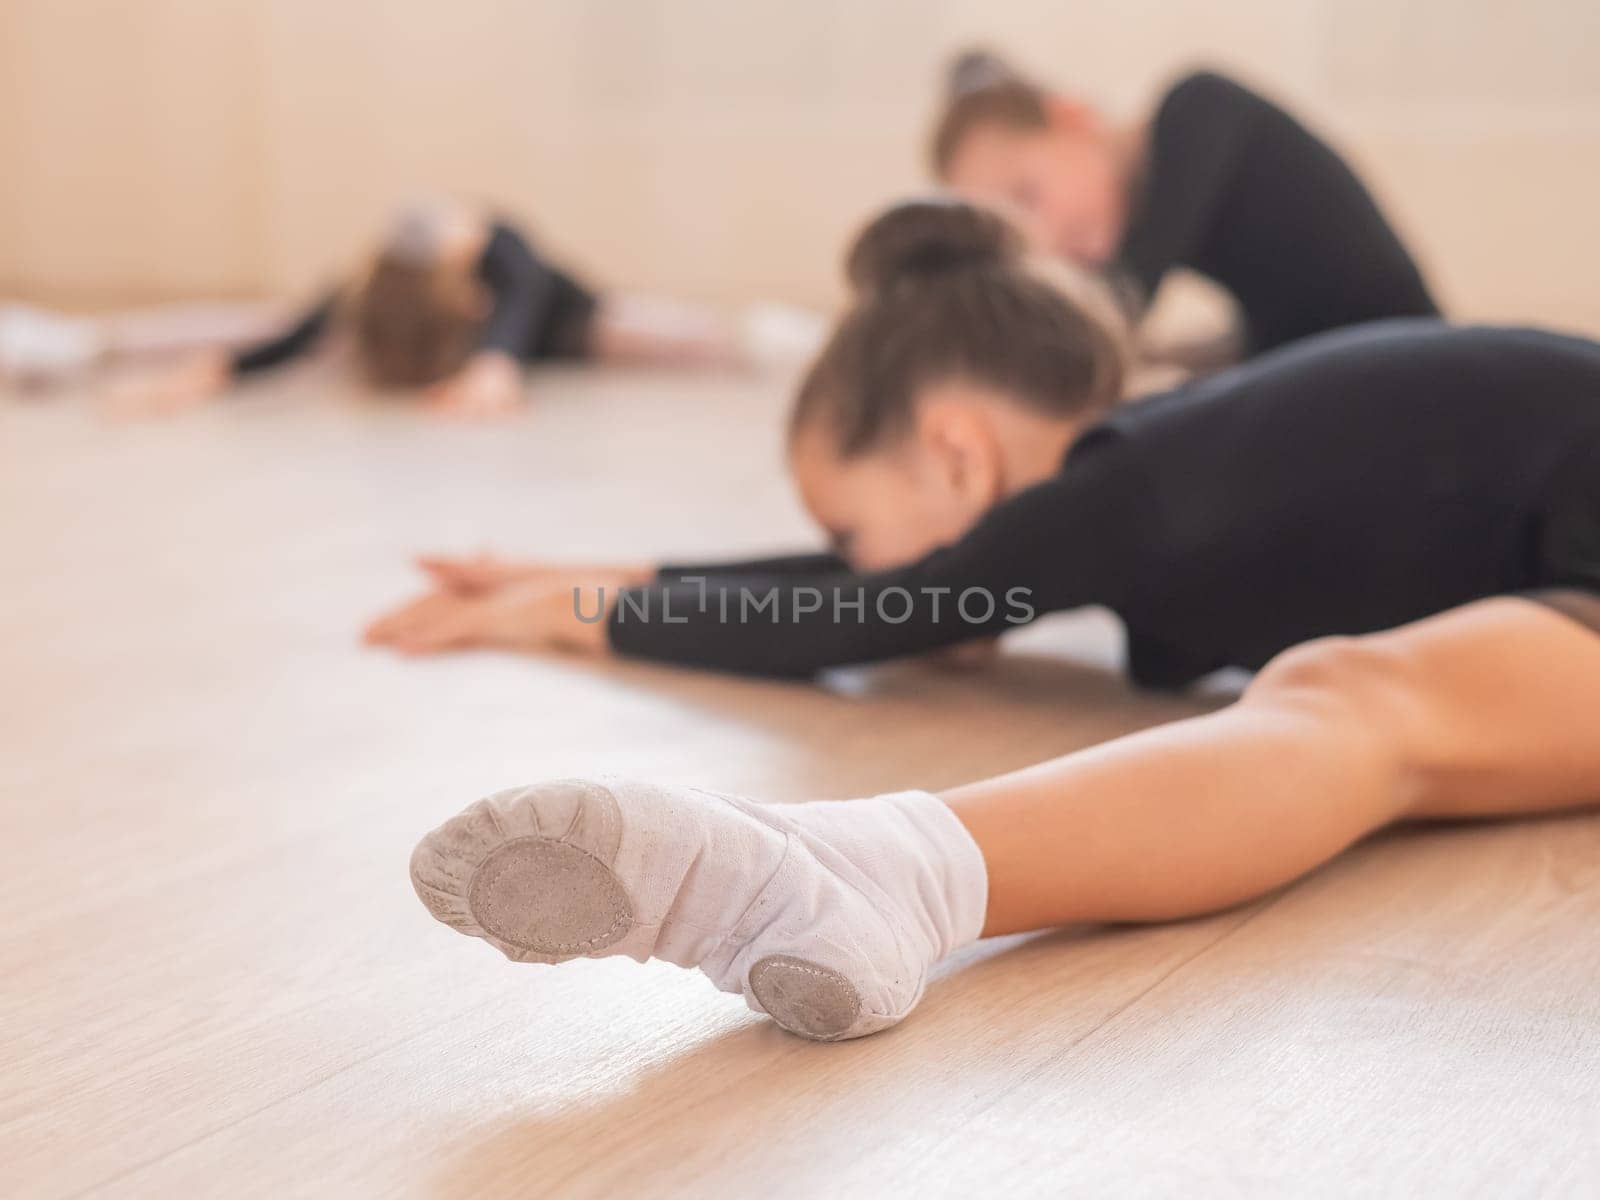 Girls ballerinas stretch while lying in a wide fold. by mrwed54